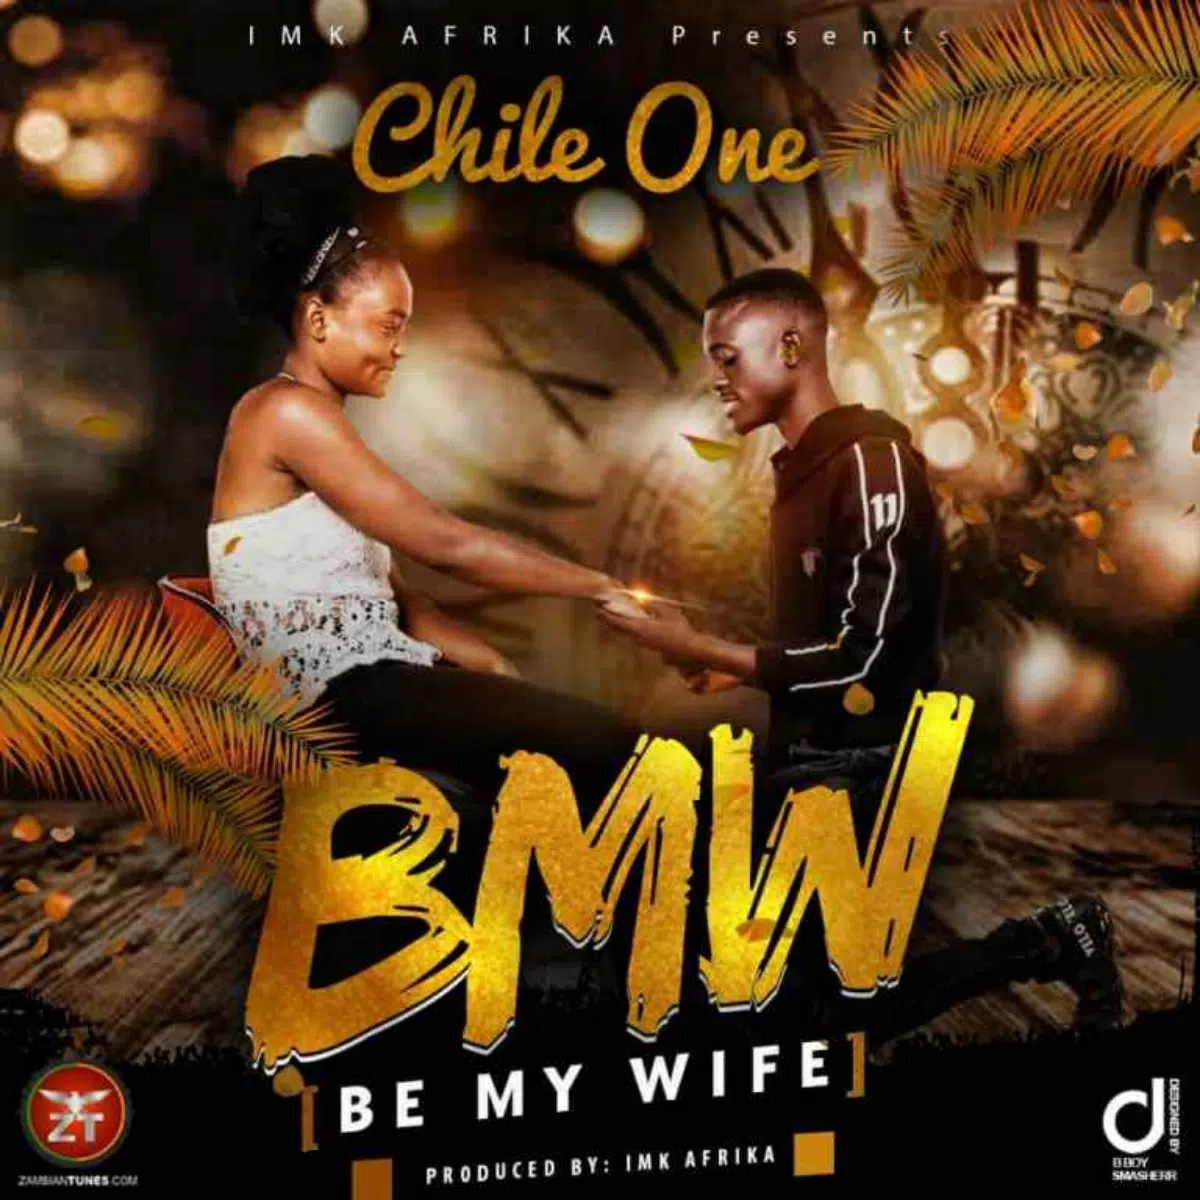 DOWNLOAD: Chile One Mr Zambia – “Be My Wife” (BMW) Mp3